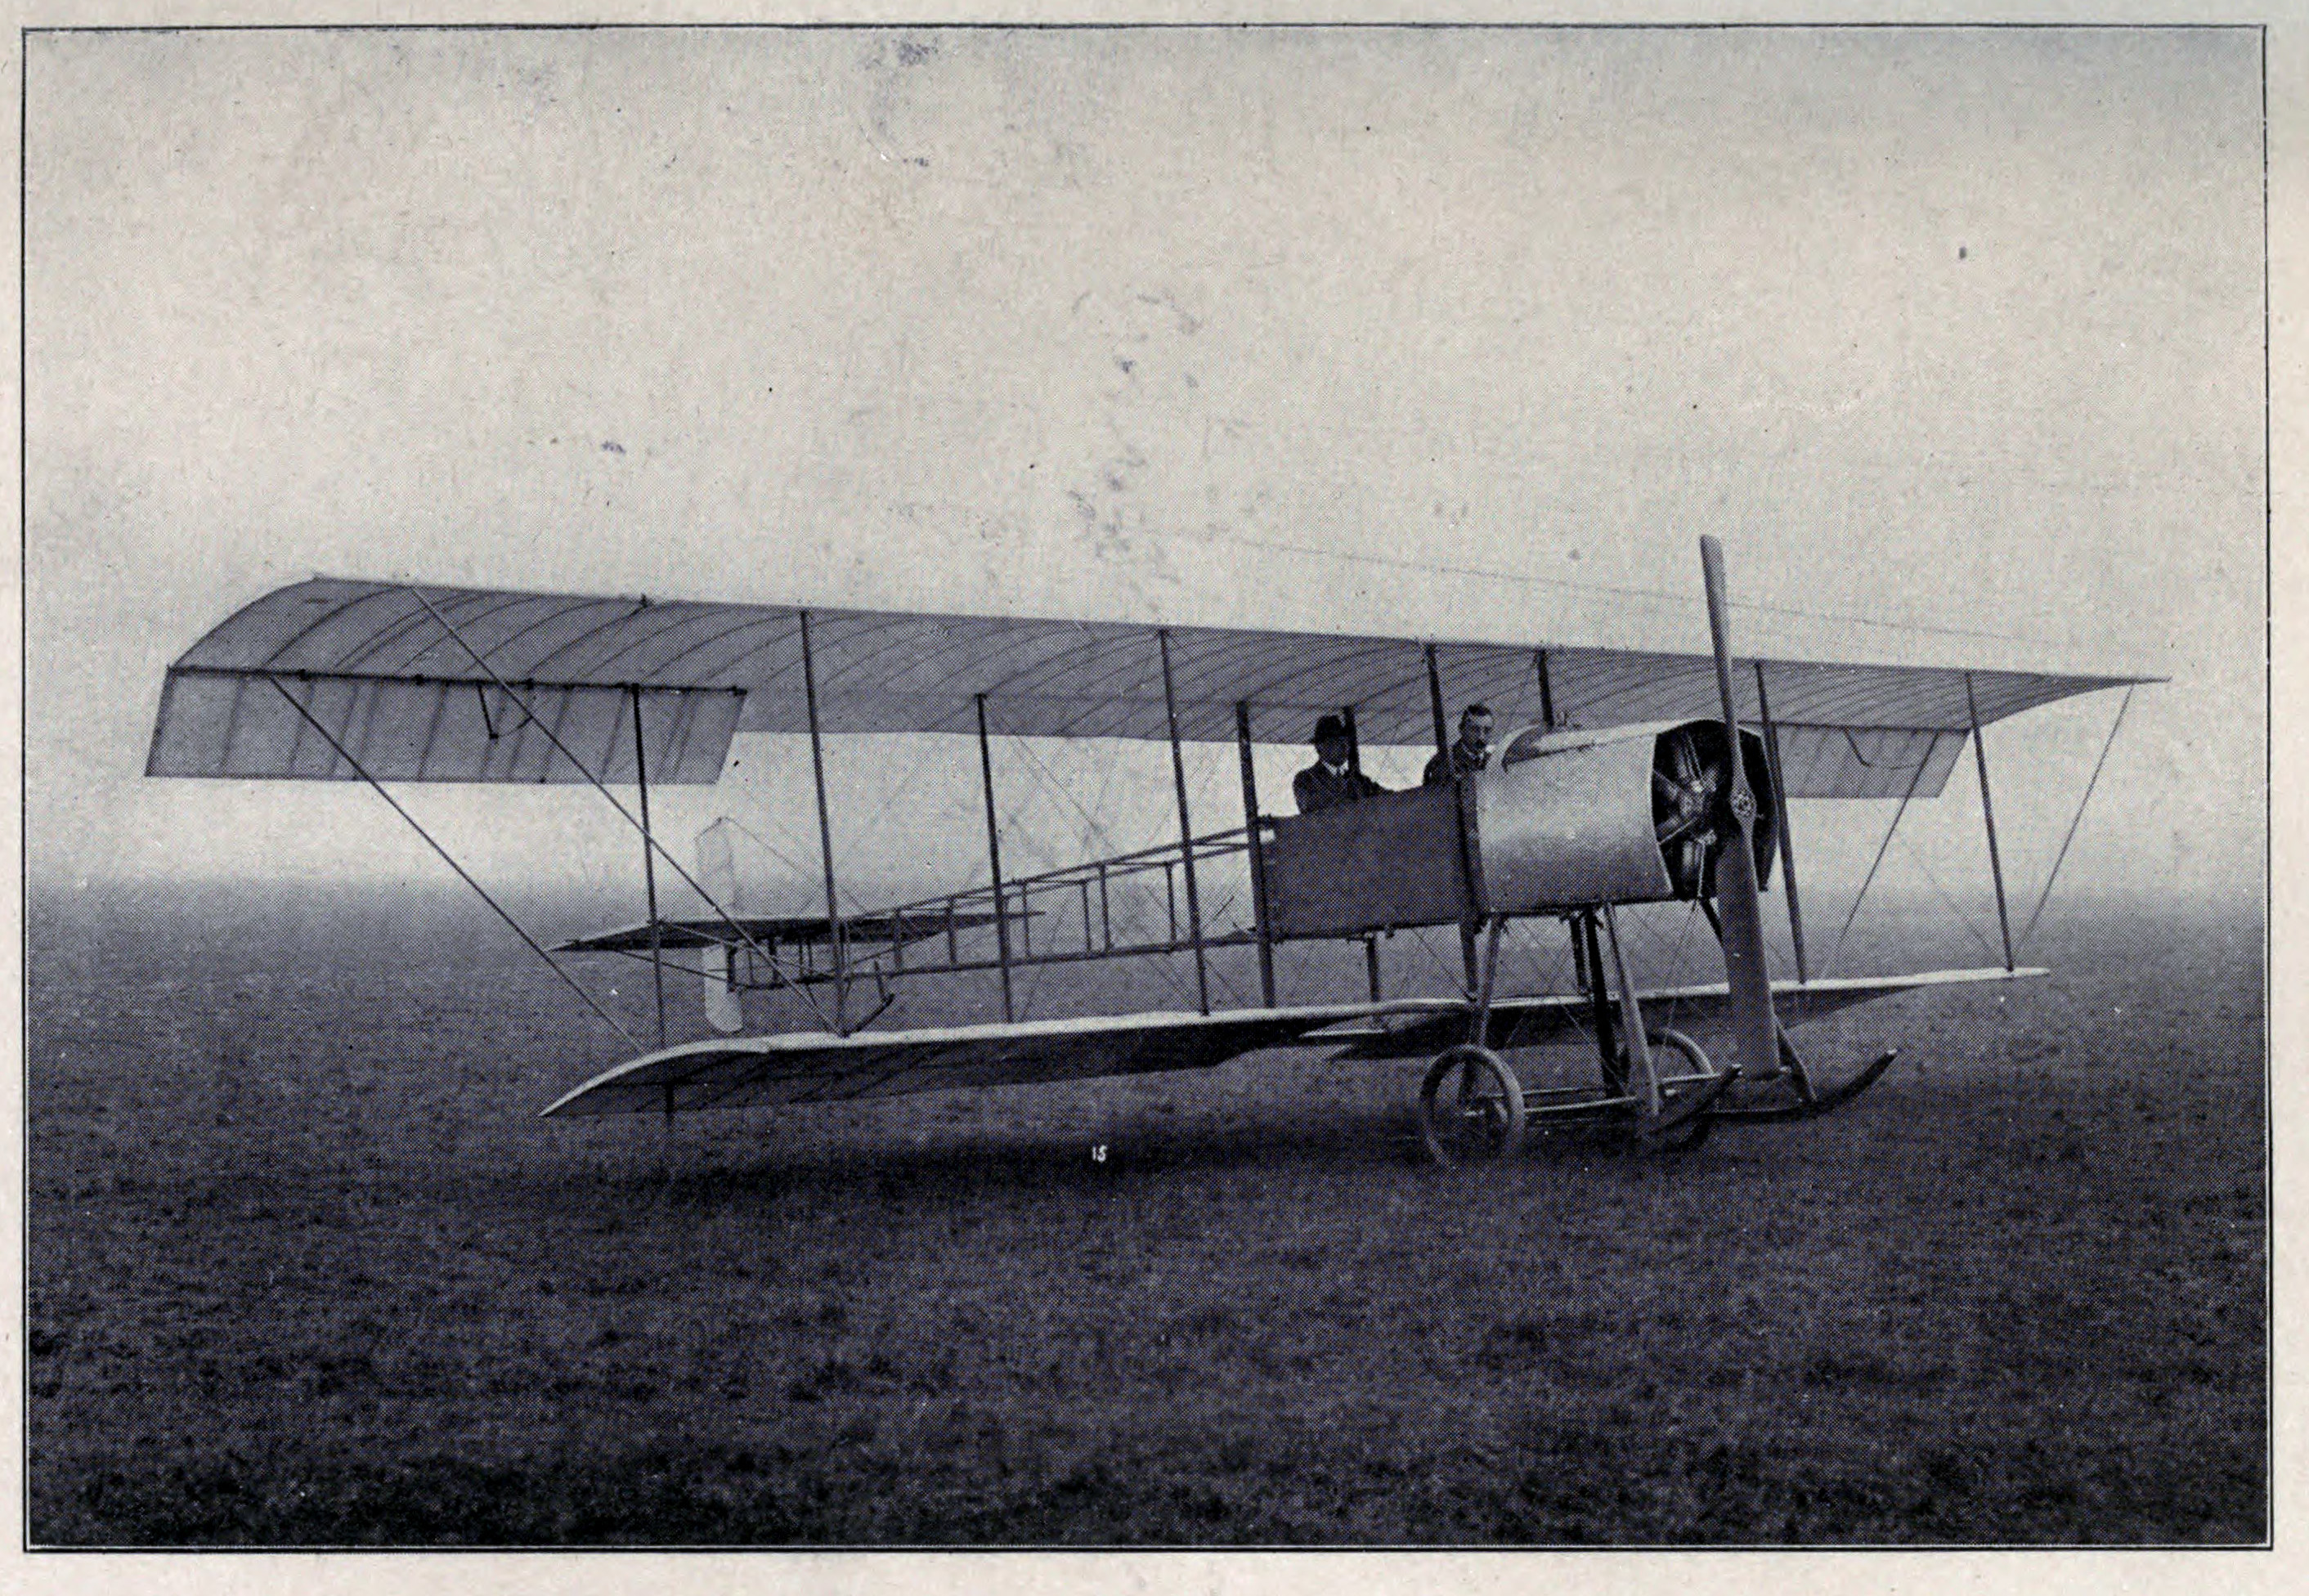 THE ENGINE-IN-FRONT BIPLANE.